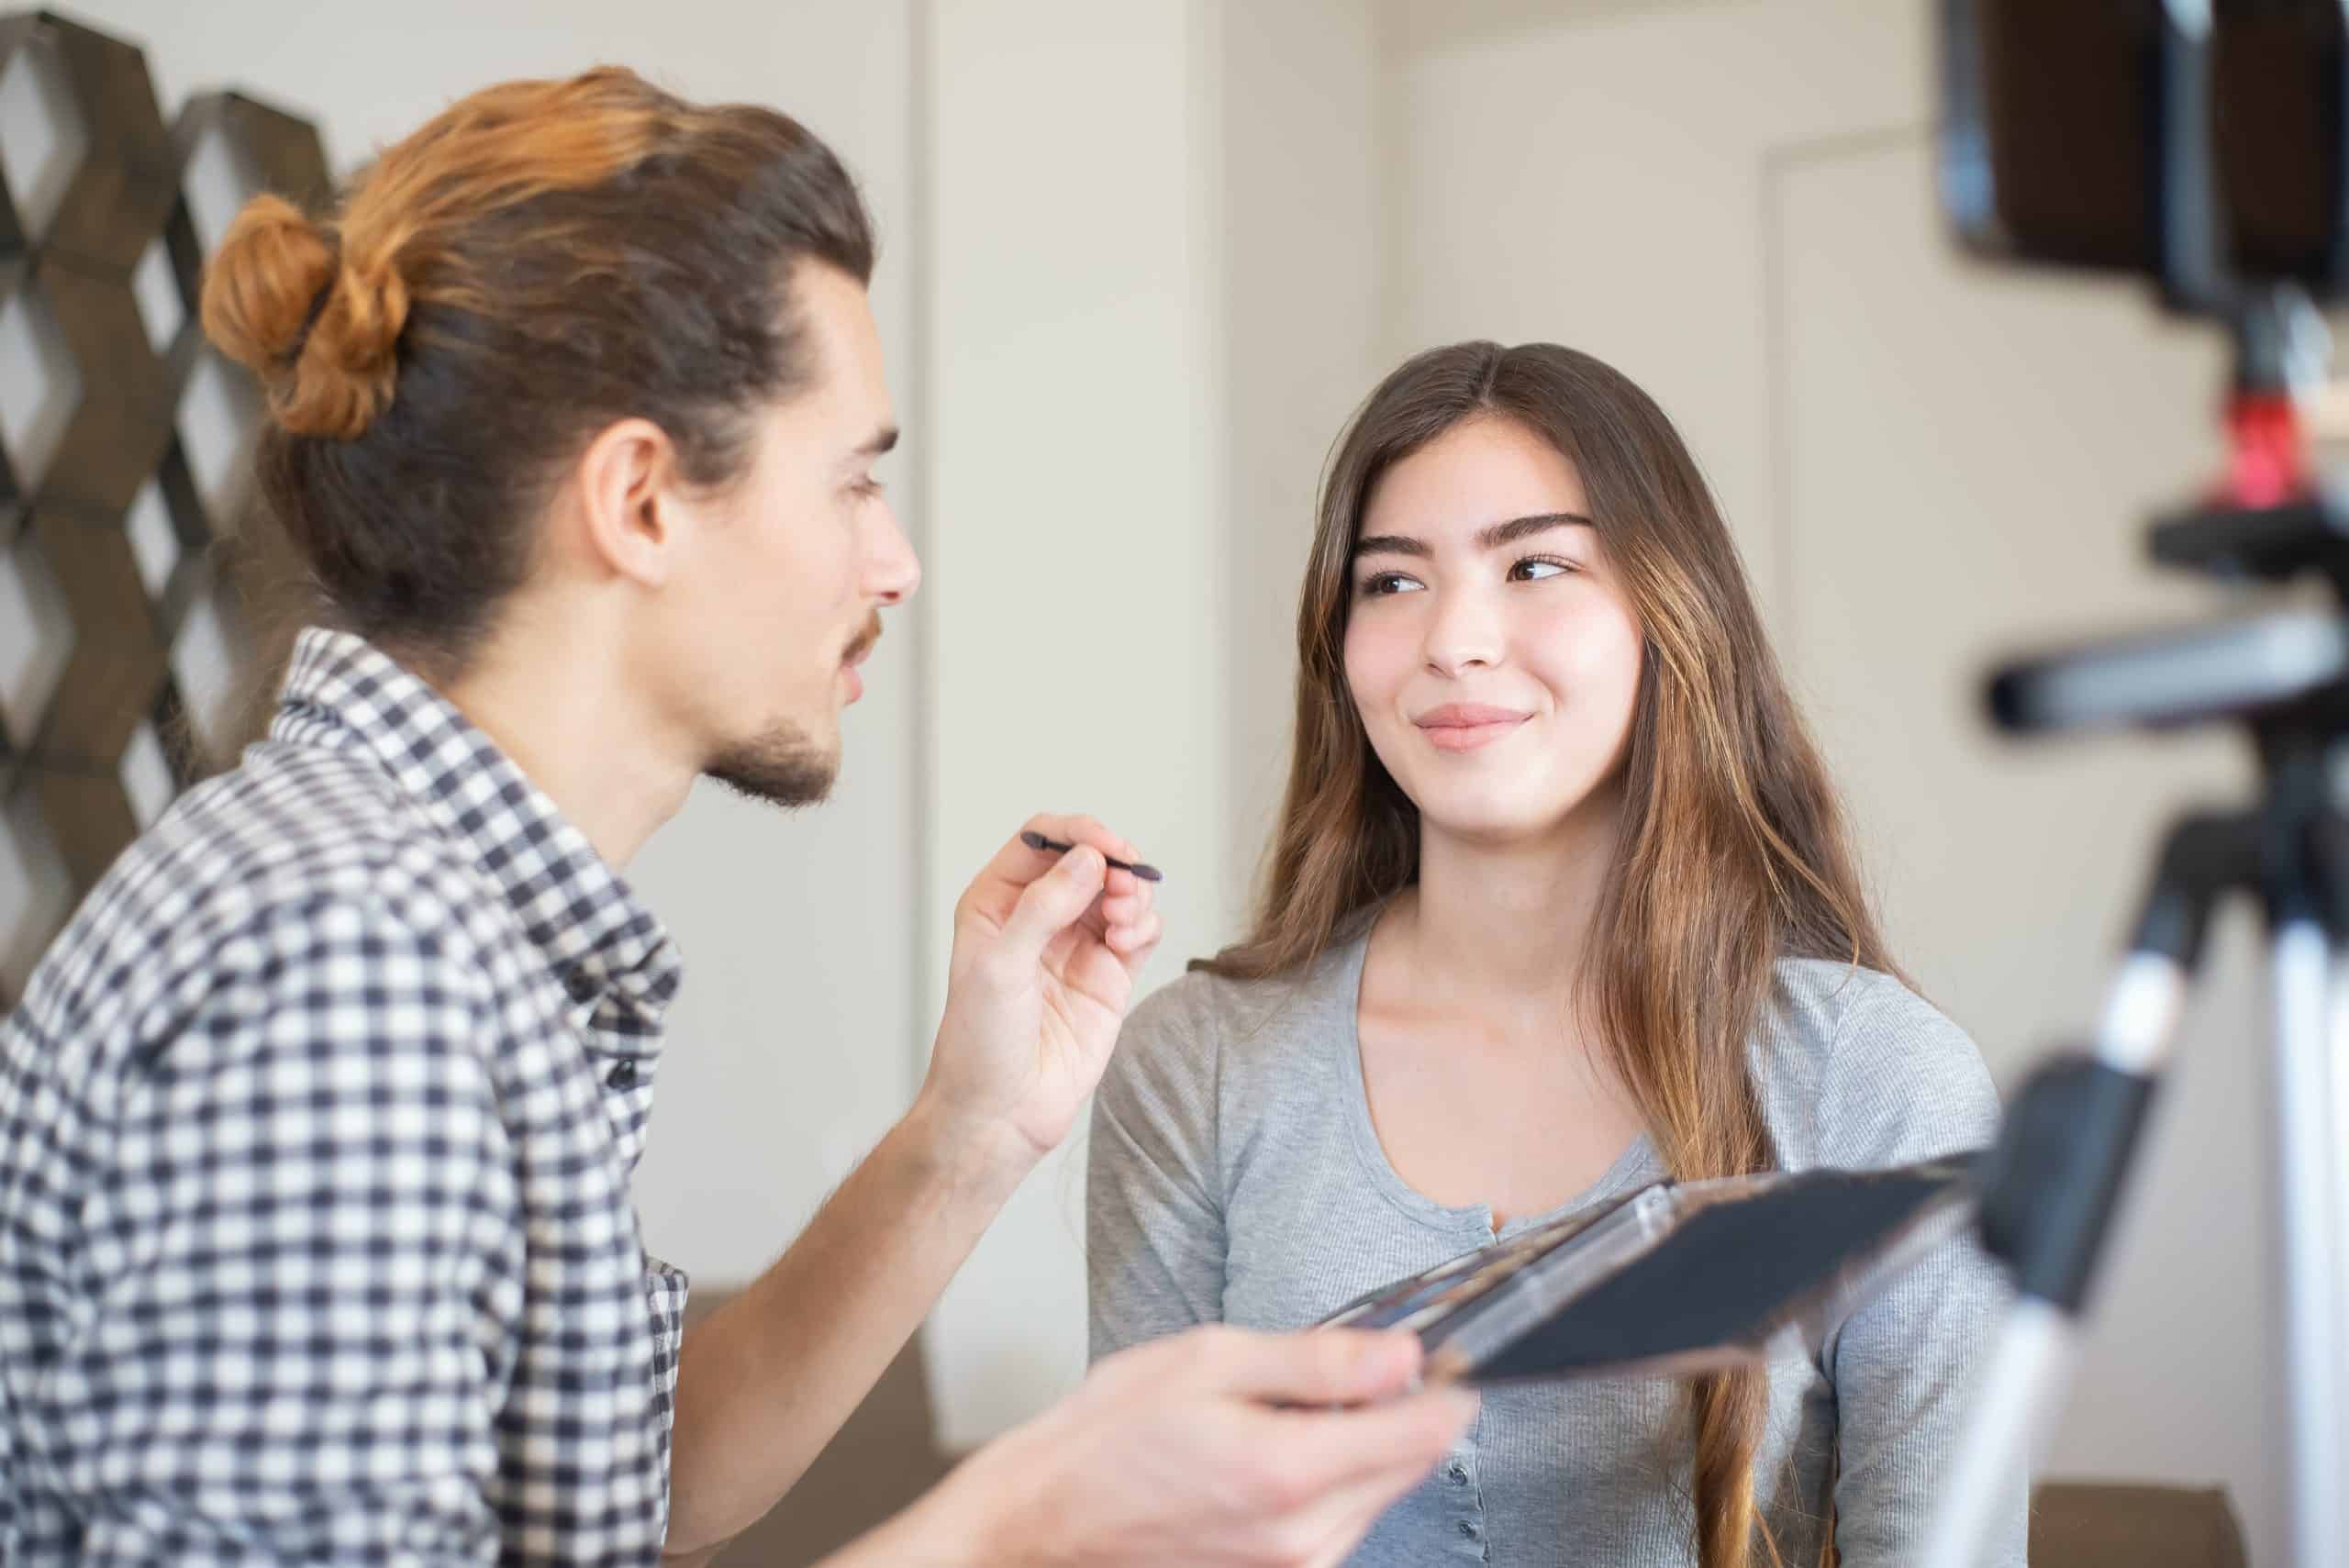 How to become a celebrity makeup artist